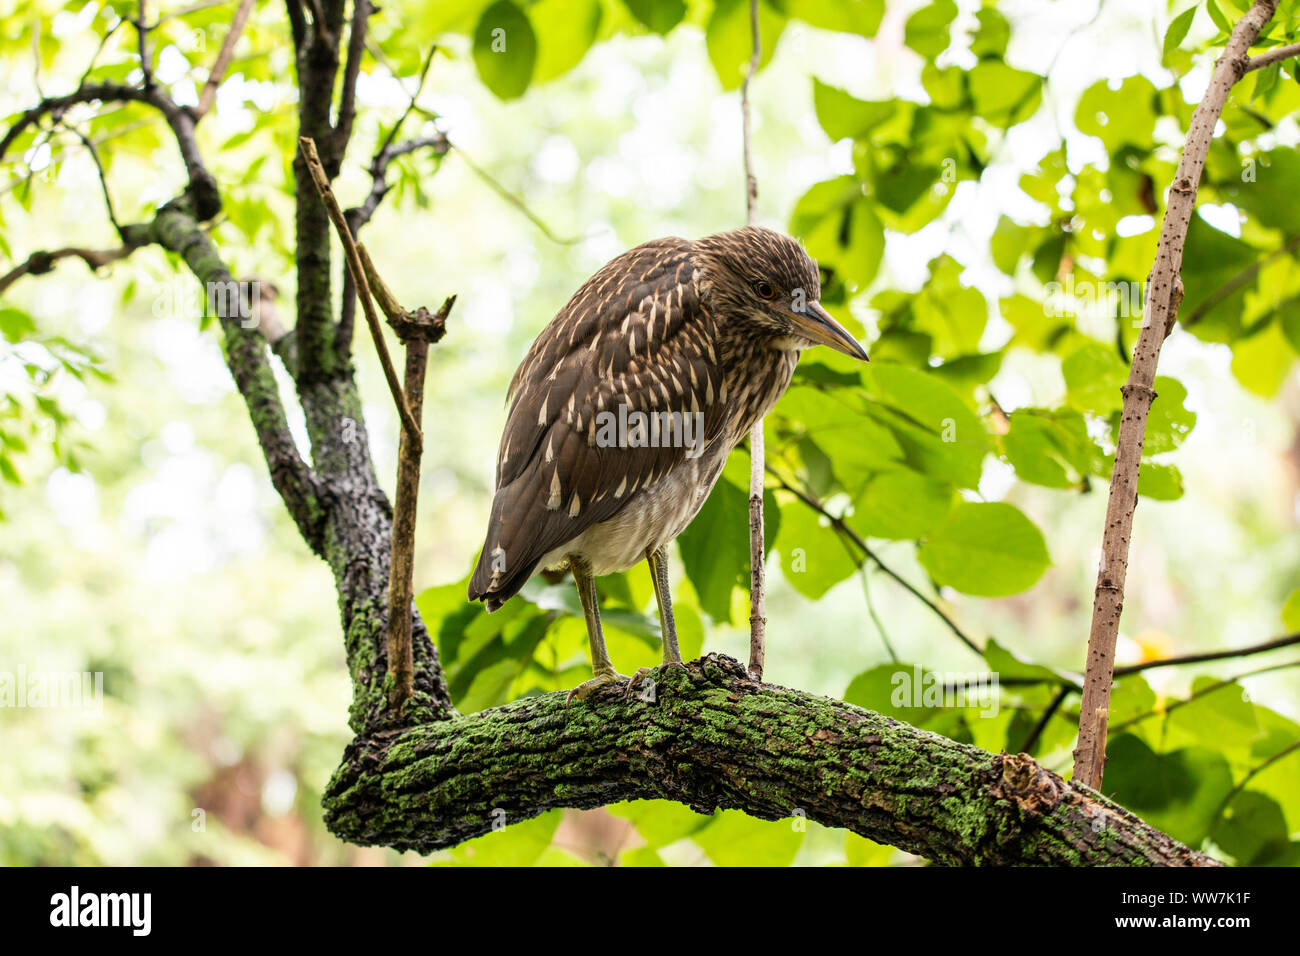 Juvenile Black-crowned night heron (Nycticorax nycticorax) at the Ellie Schiller Homosassa Springs Wildlife State Park, Florida, USA. Stock Photo